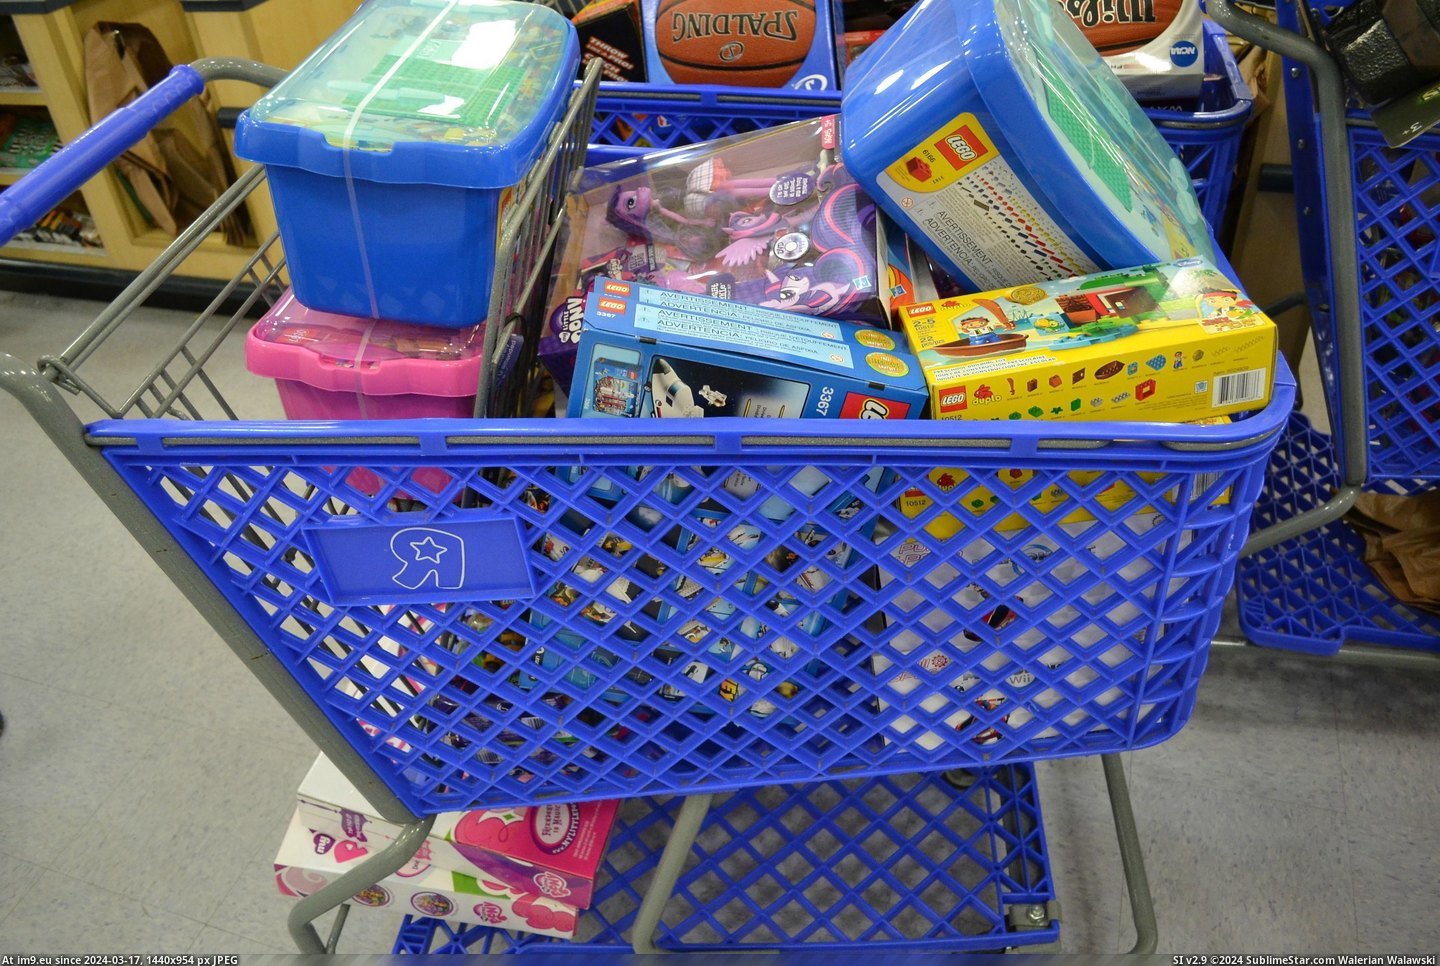 #For #Happy #All #Bunch #Tots #Donated #Christmas #Toys #Kids [Pics] Hopefully this makes a bunch of kids happy this Christmas all donated to Toys for Tots. 4 Pic. (Obraz z album My r/PICS favs))